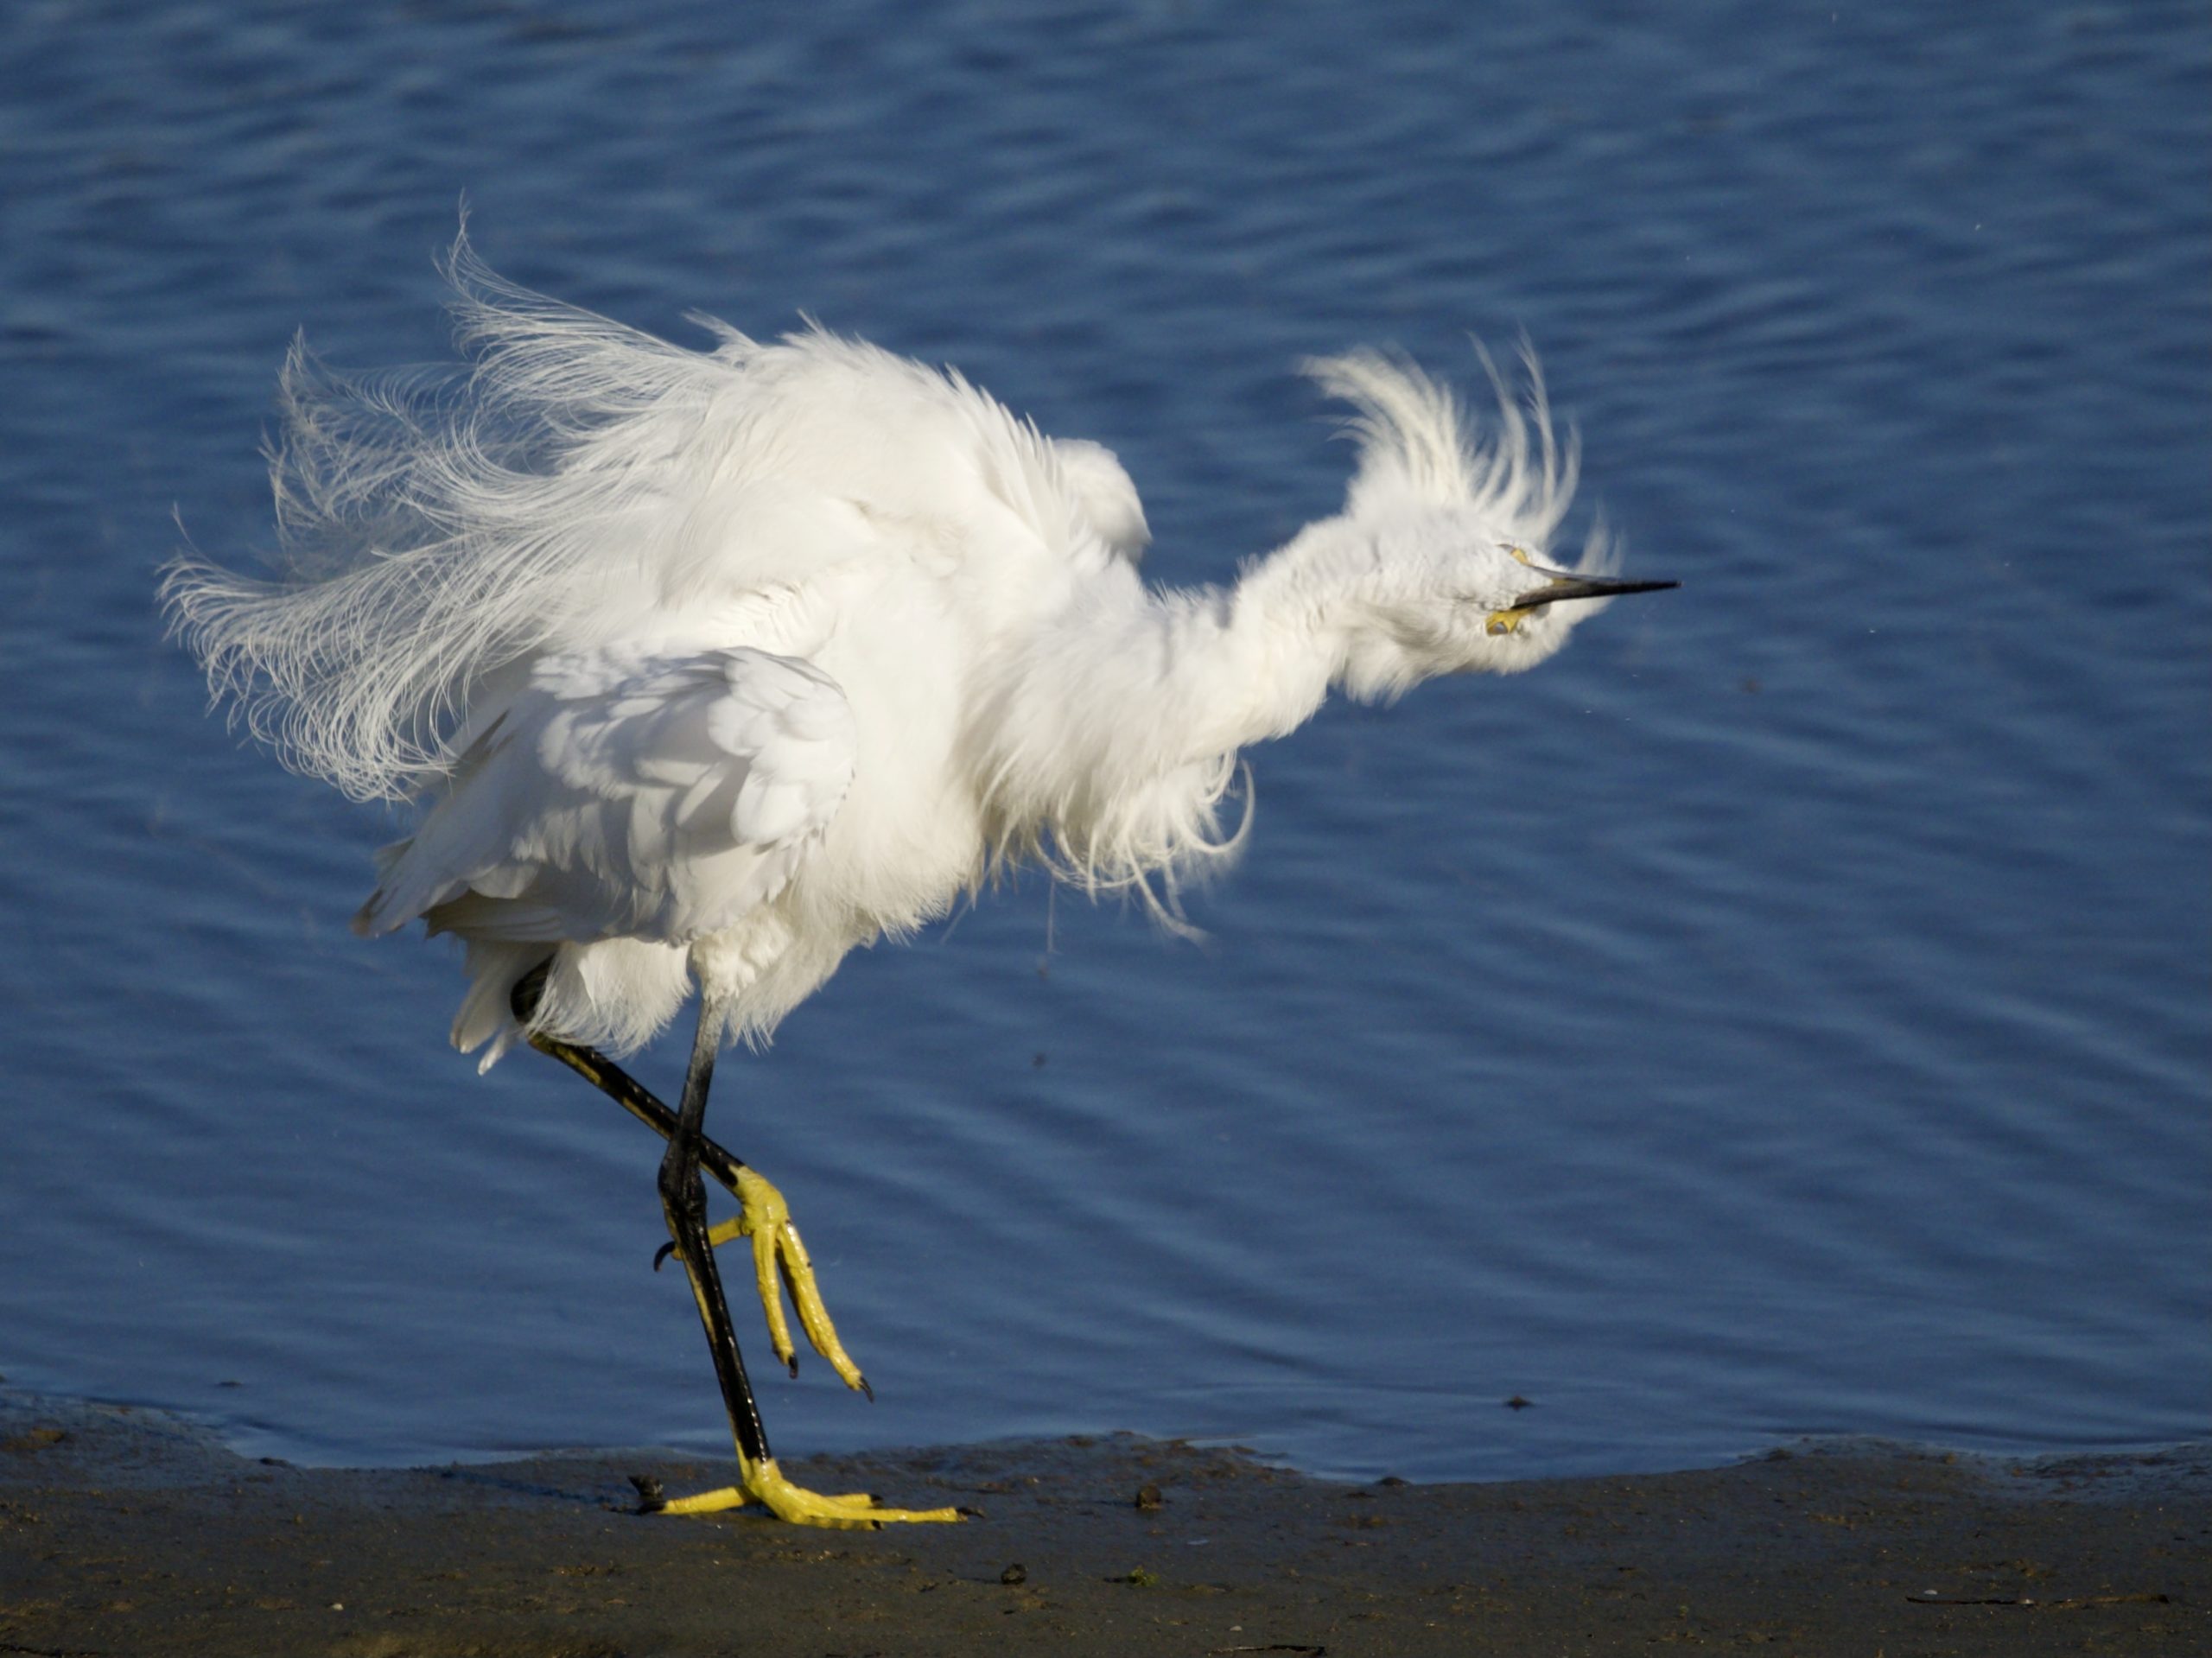 Snowy Egret with Ruffled Feathers